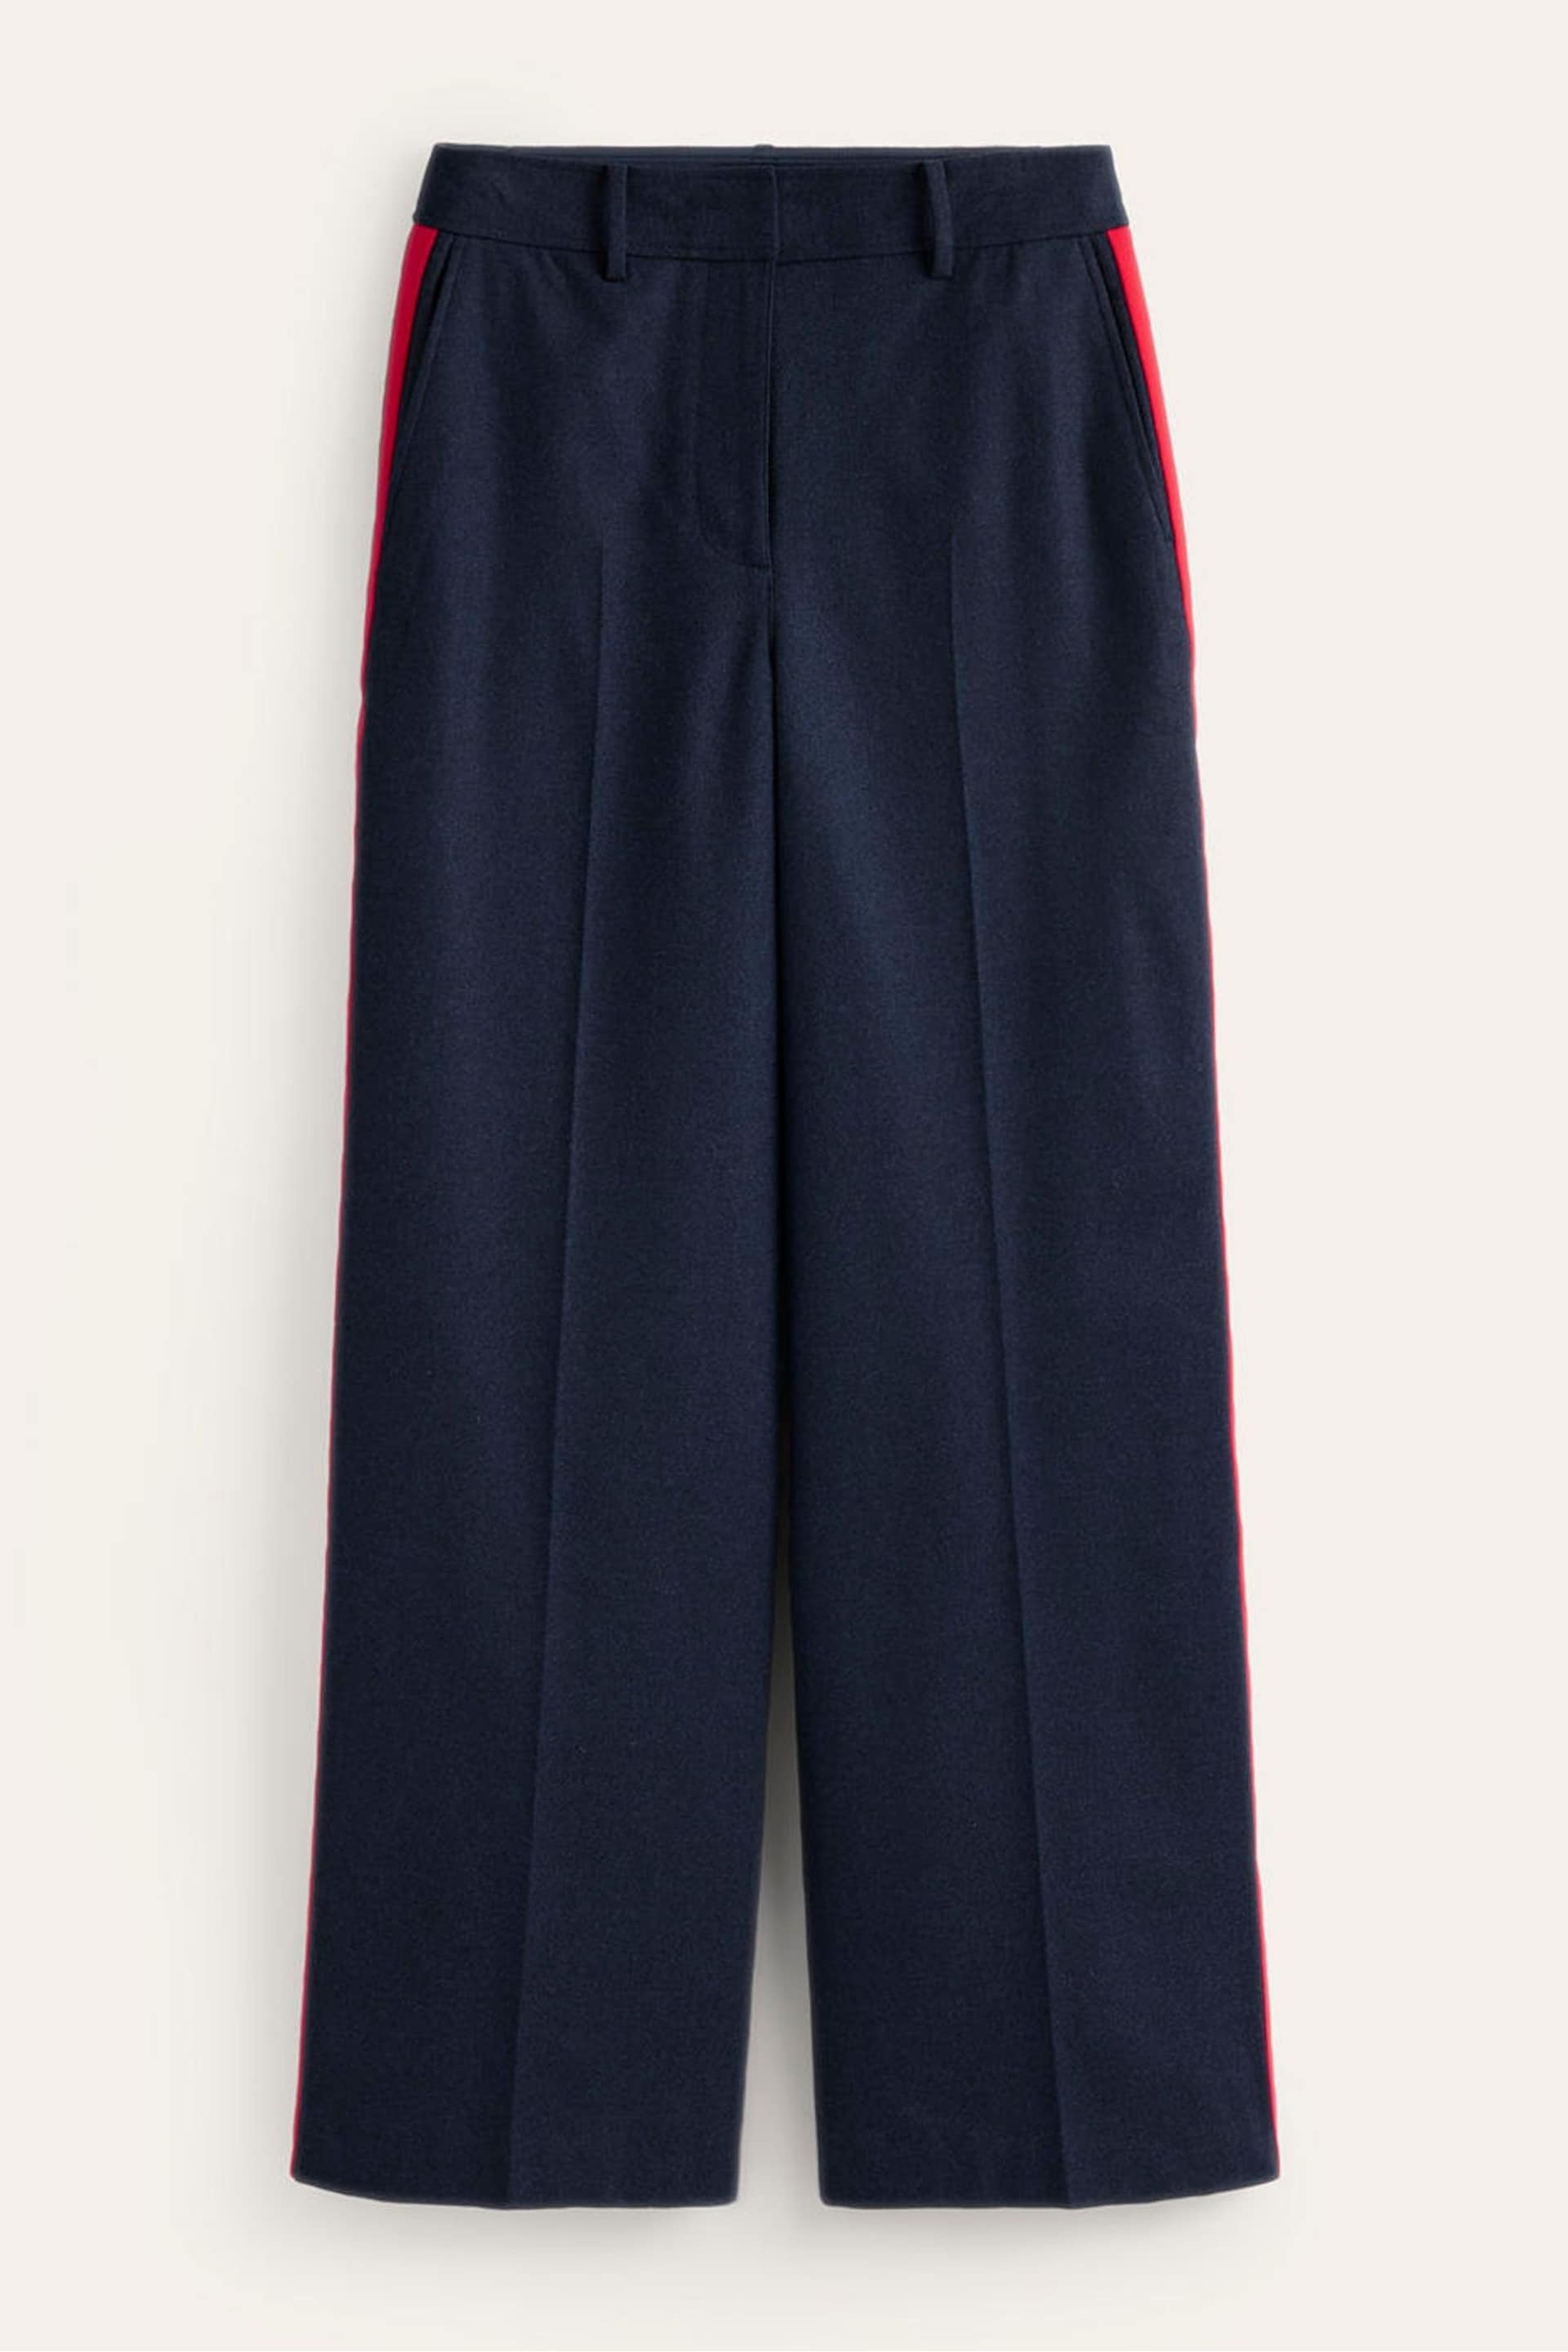 Boden Blue Westbourne Wool Trousers - Image 5 of 5